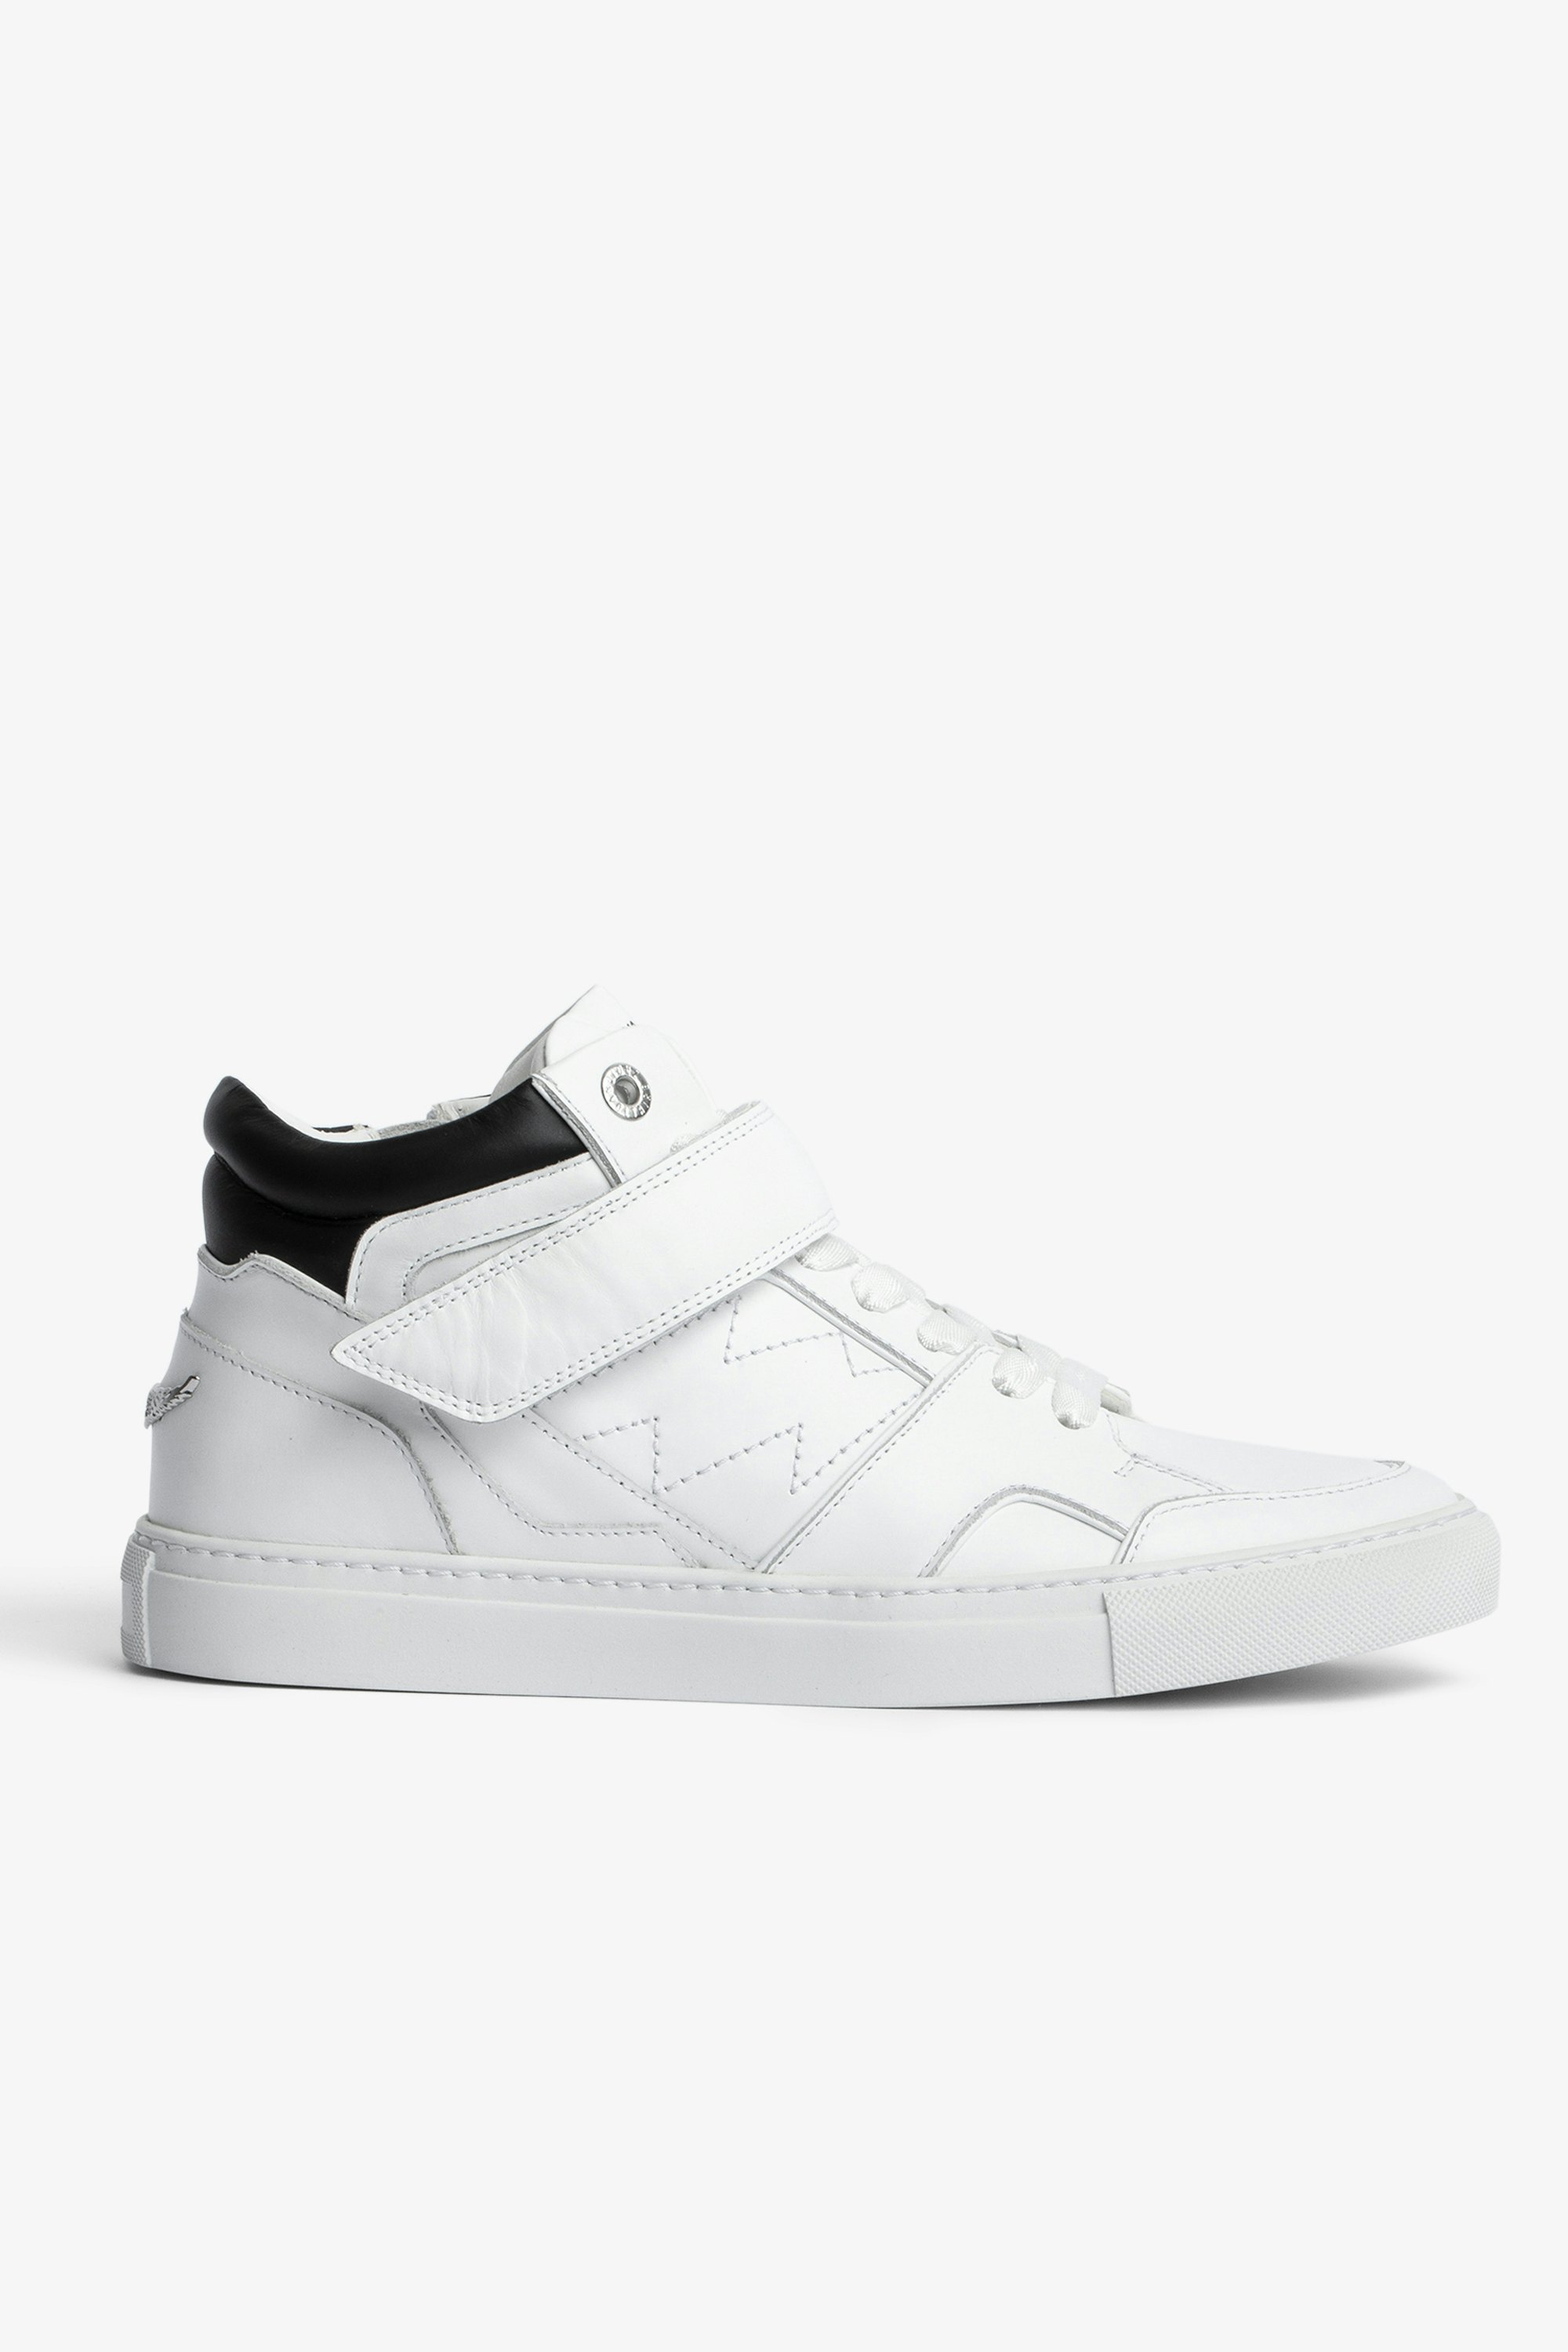 ZV1747 Mid Flash trainers Women’s white leather mid-top sneakers